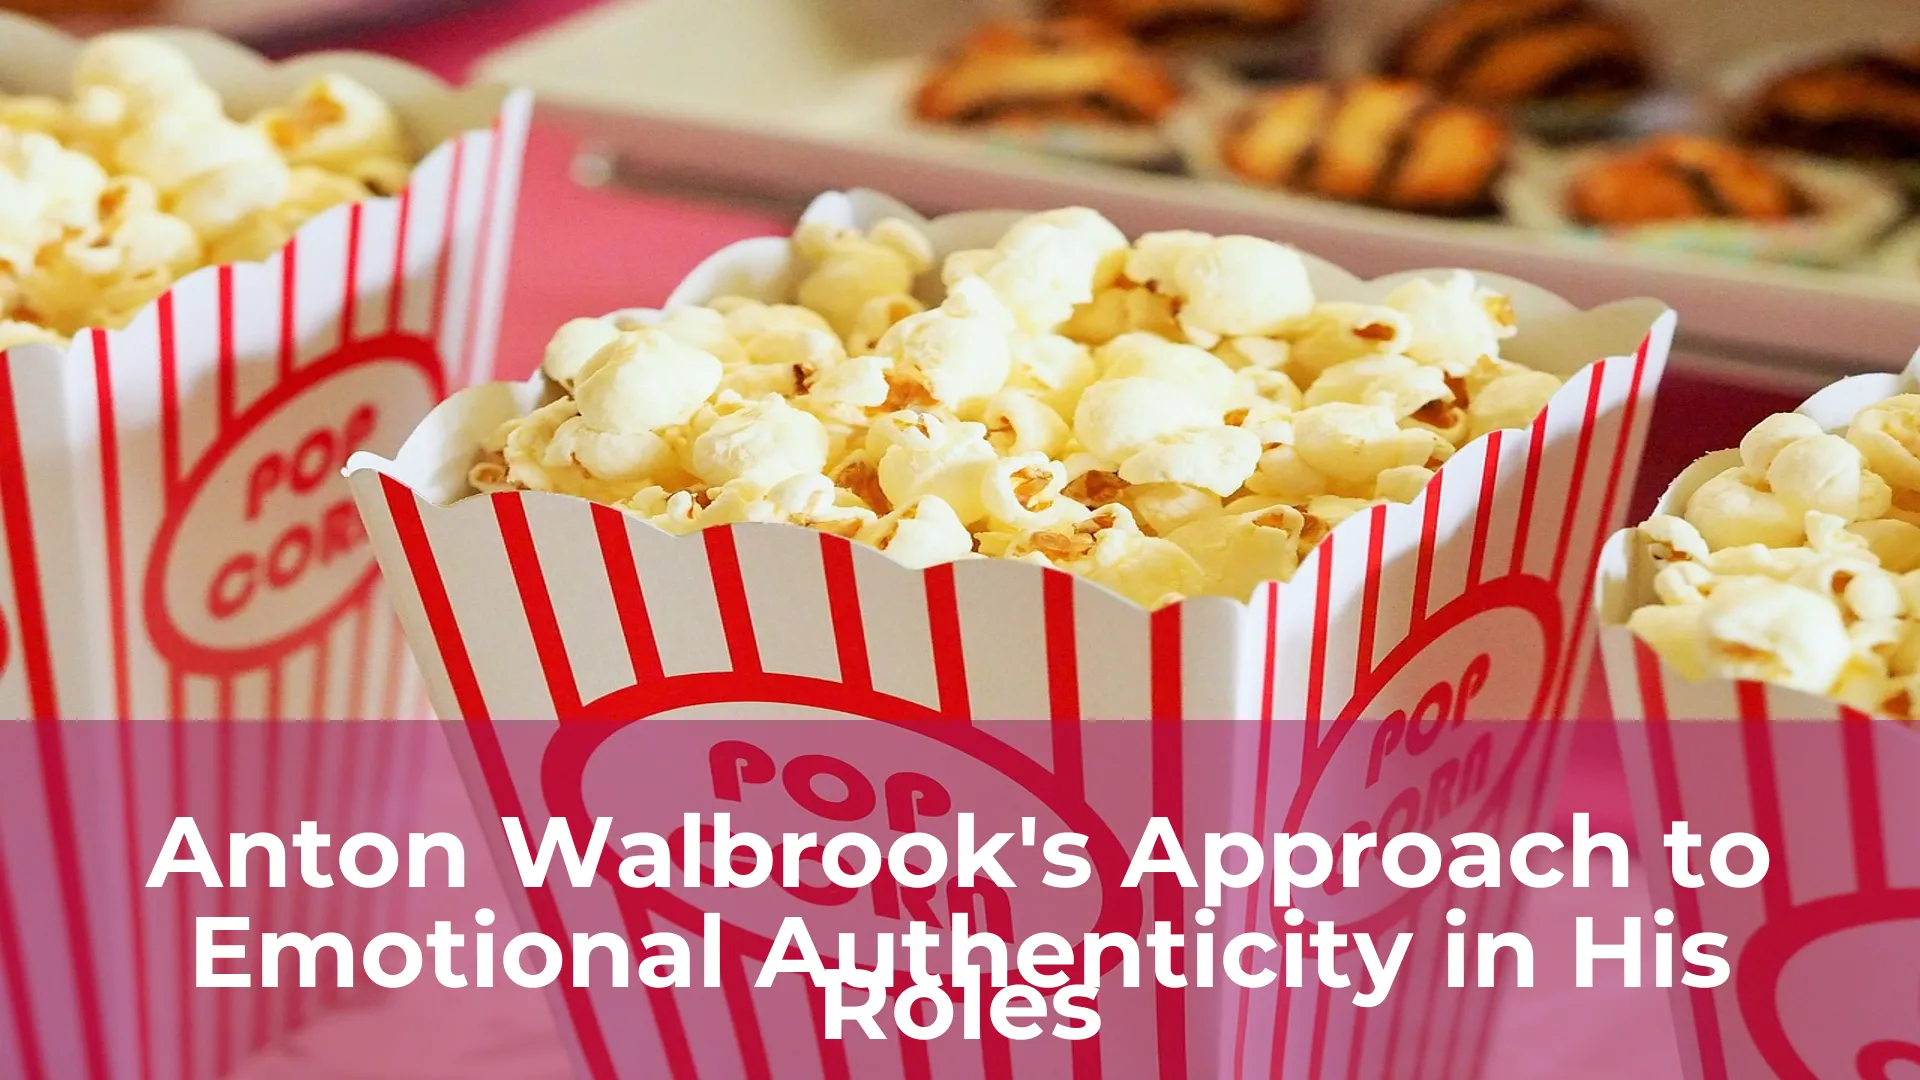 Anton walbrooks approach to emotional authenticity in his roles